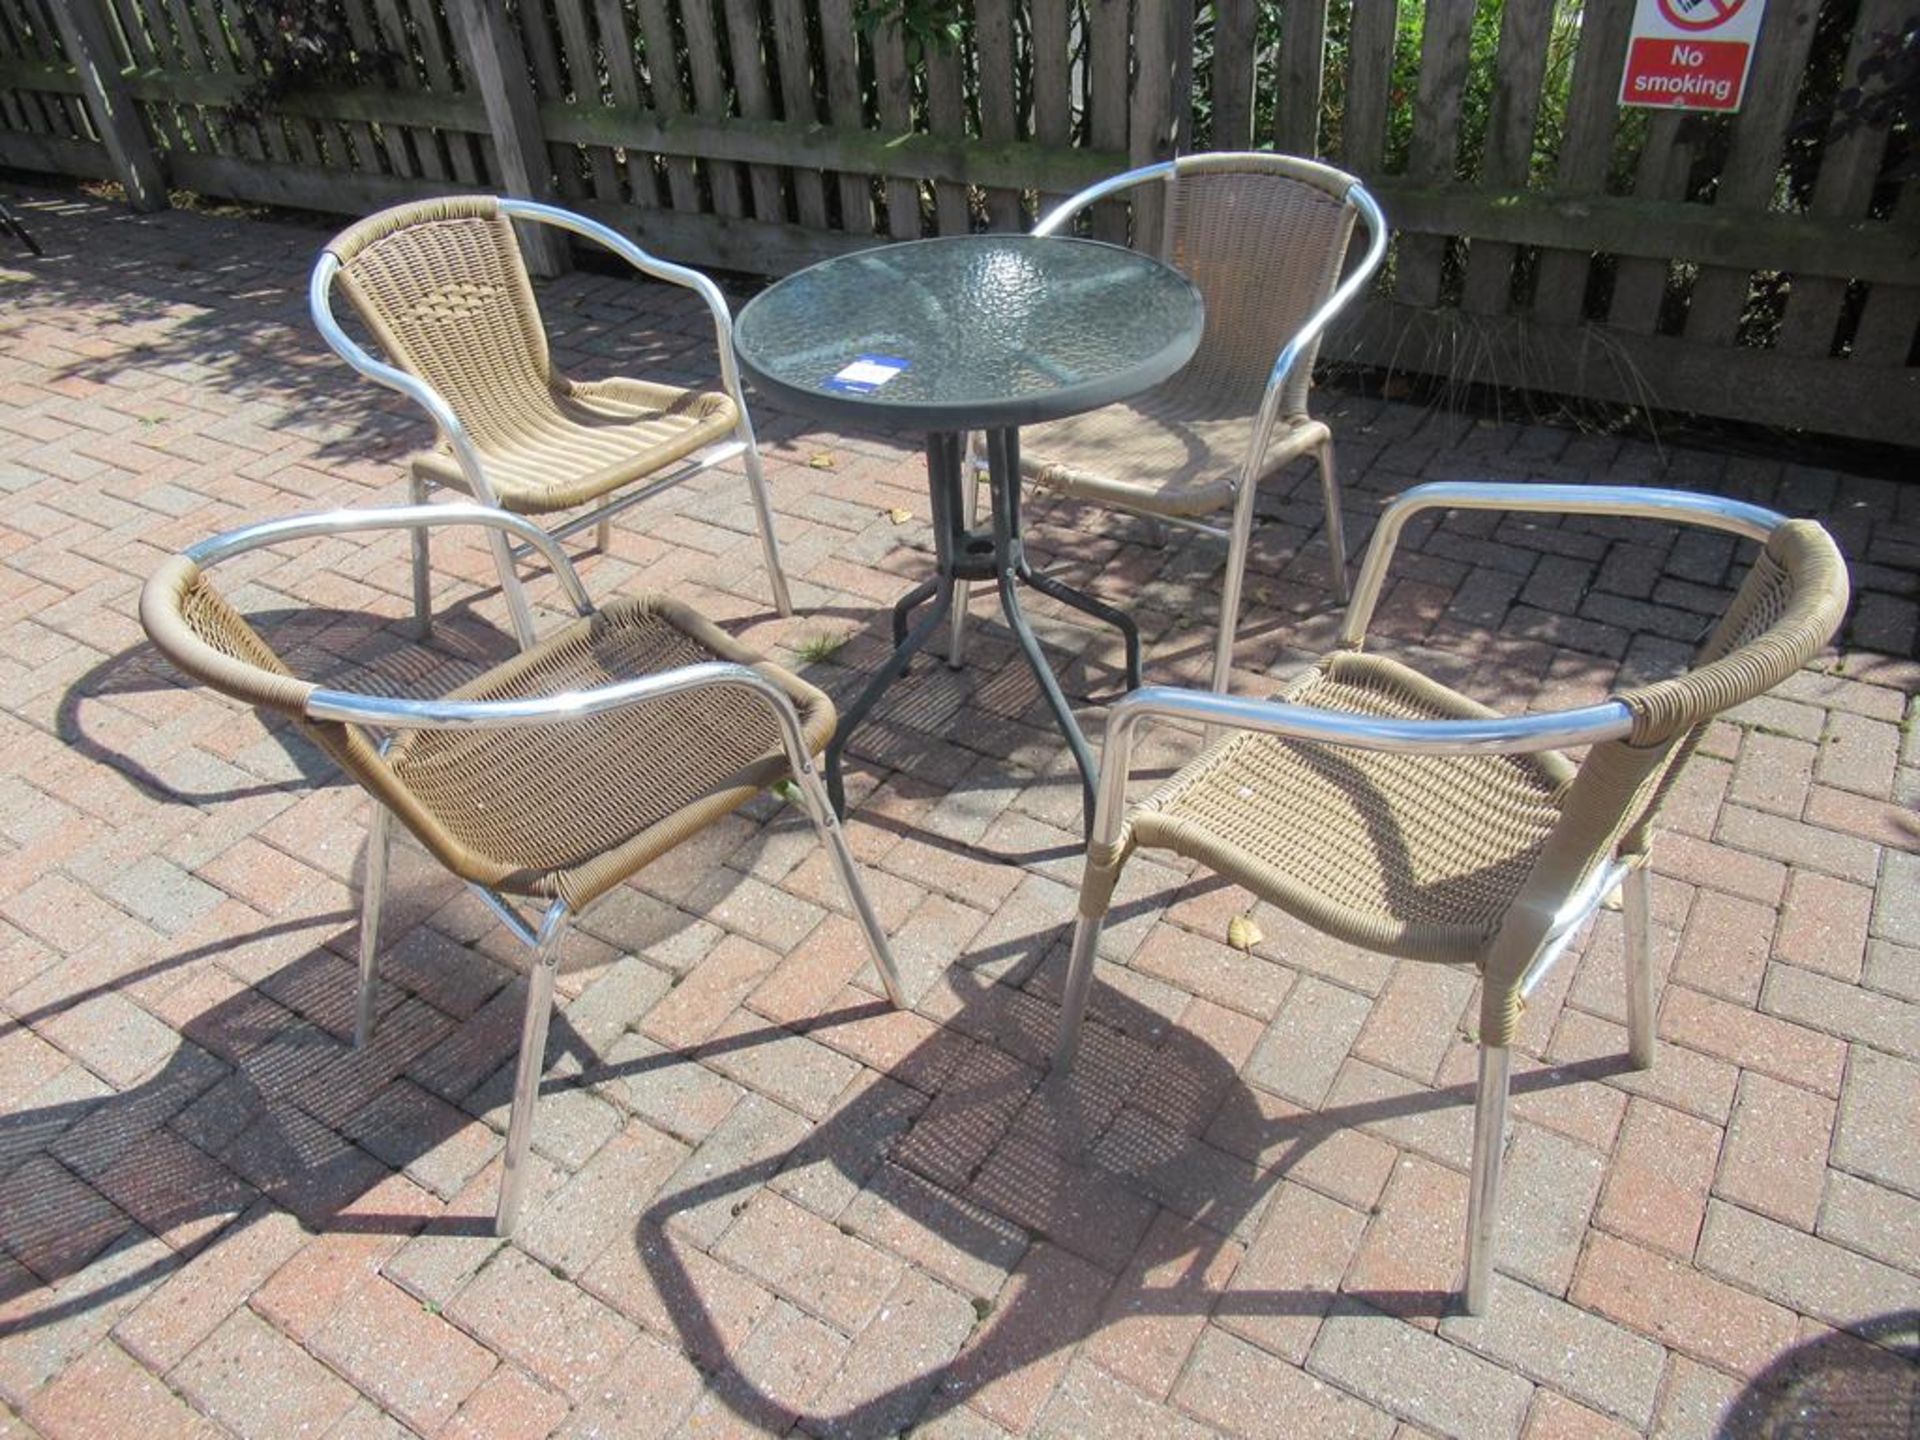 Metal Framed Circular Glass Top Garden Table with 4 x Metal Framed Garden Chairs - Image 3 of 3